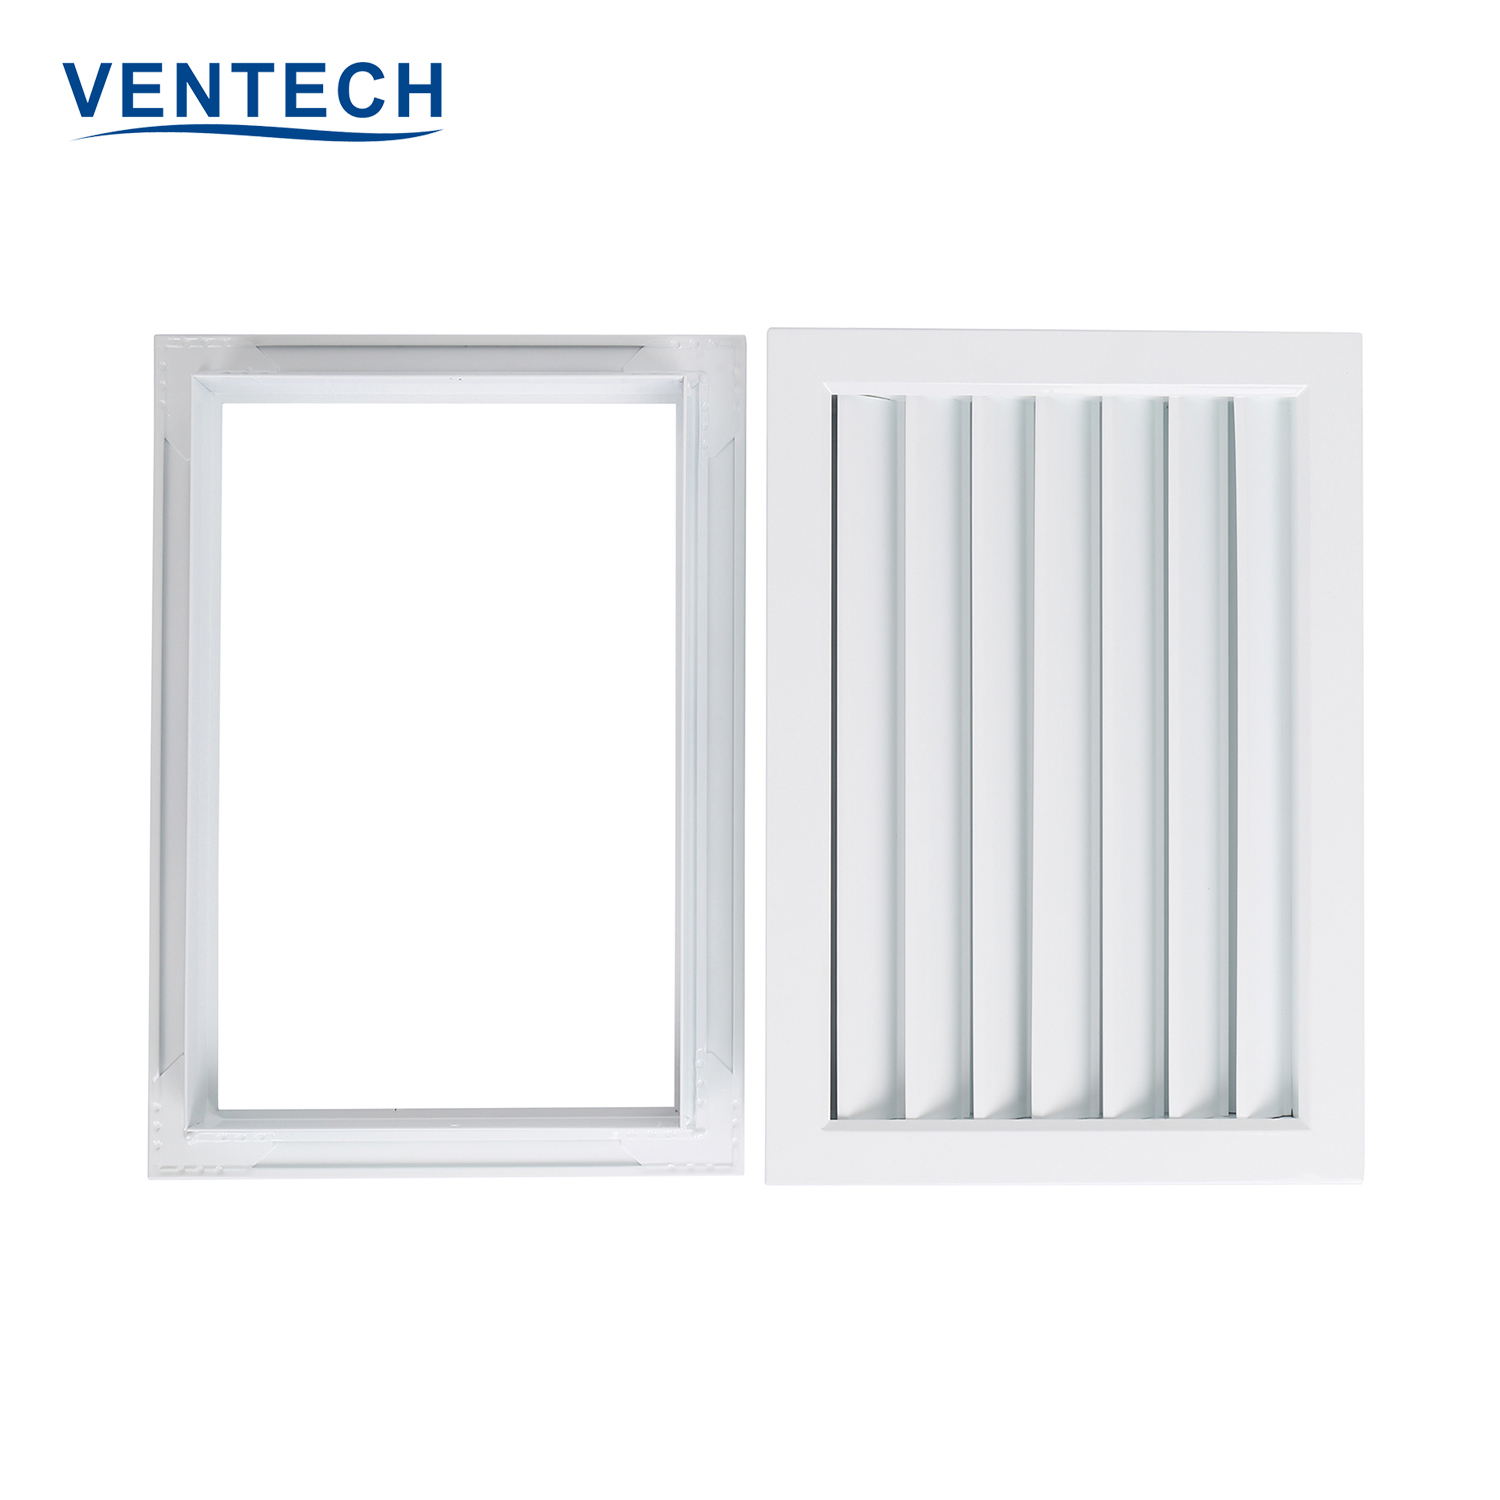 Ventech high-quality hvac air intake grille supplier for large public areas-1